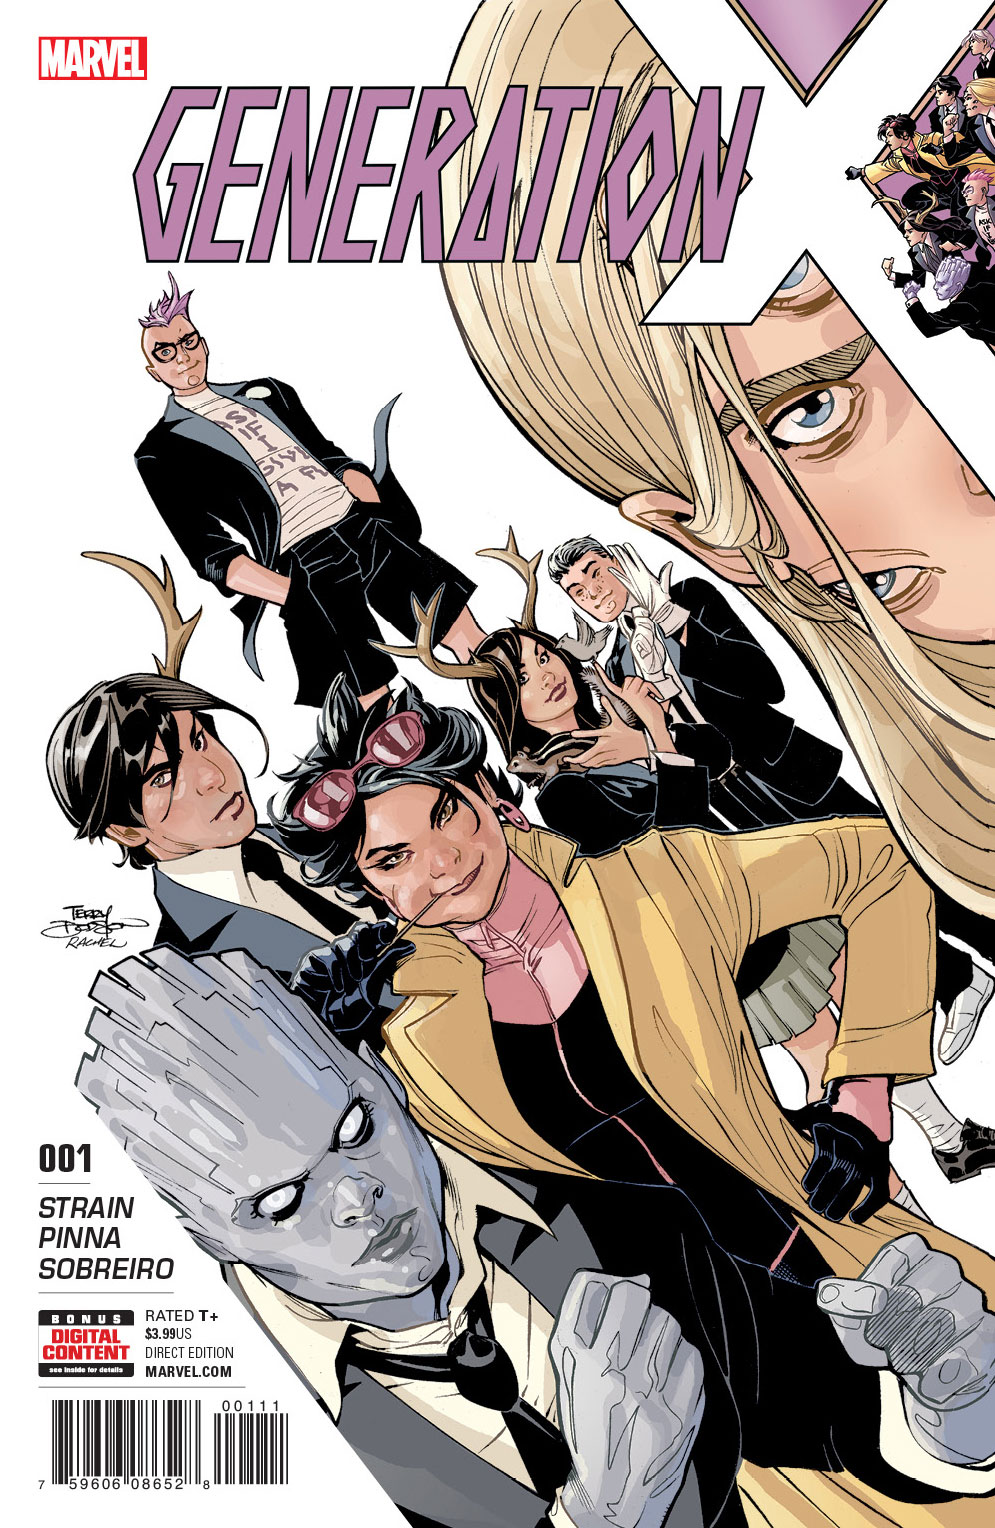 Generation X #1 Review